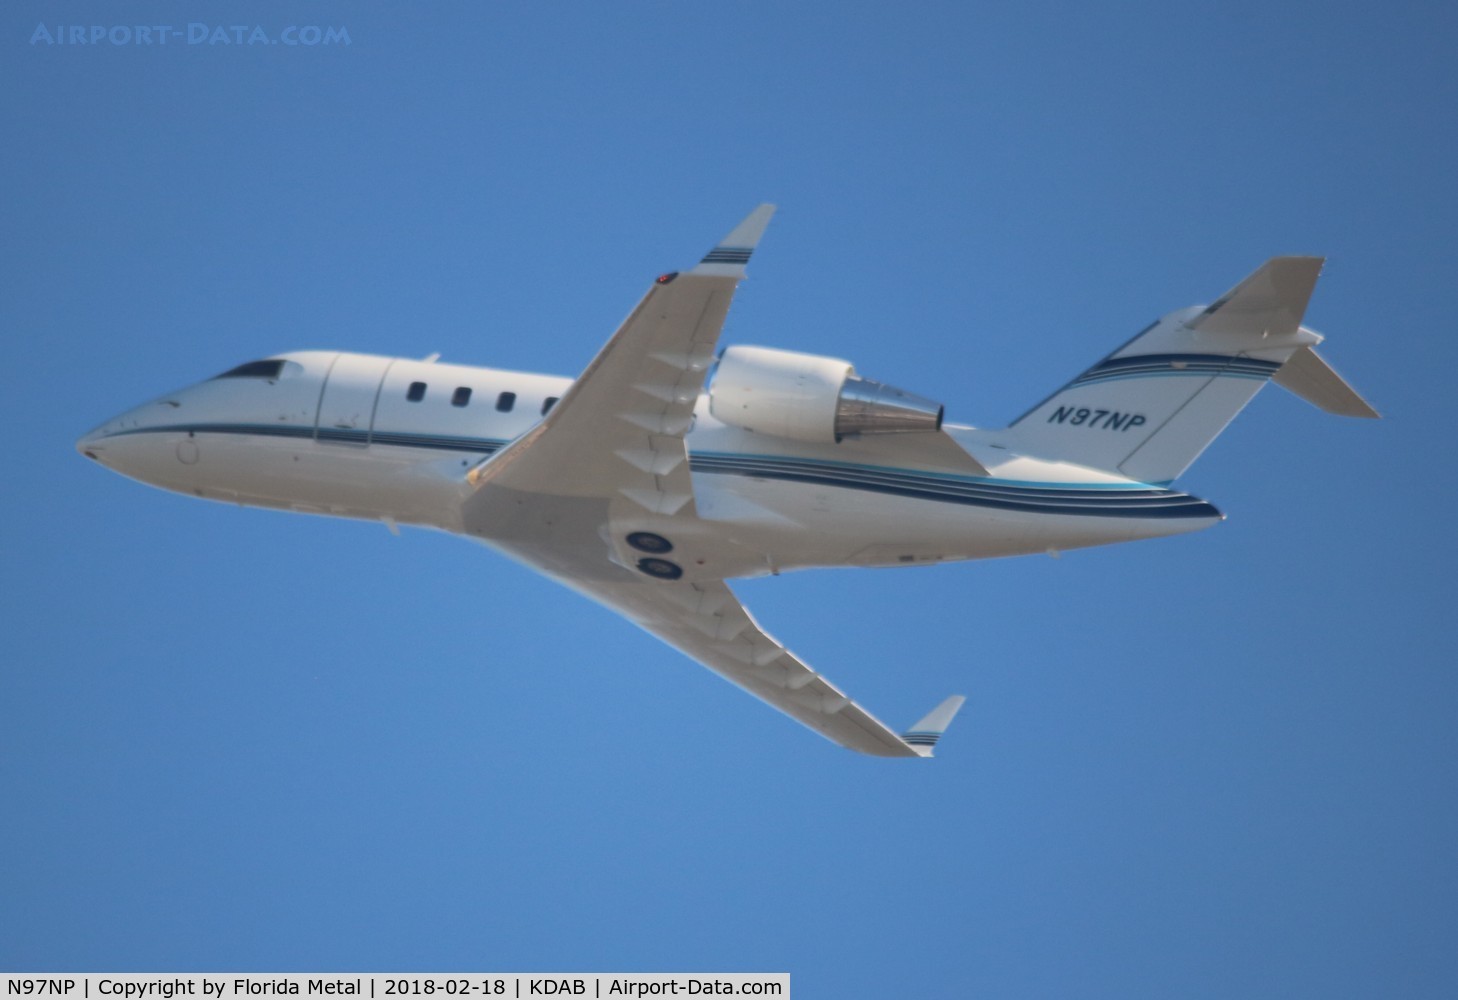 N97NP, 2012 Bombardier CL-600-2B16 C/N 5905, Challenger 605 zx